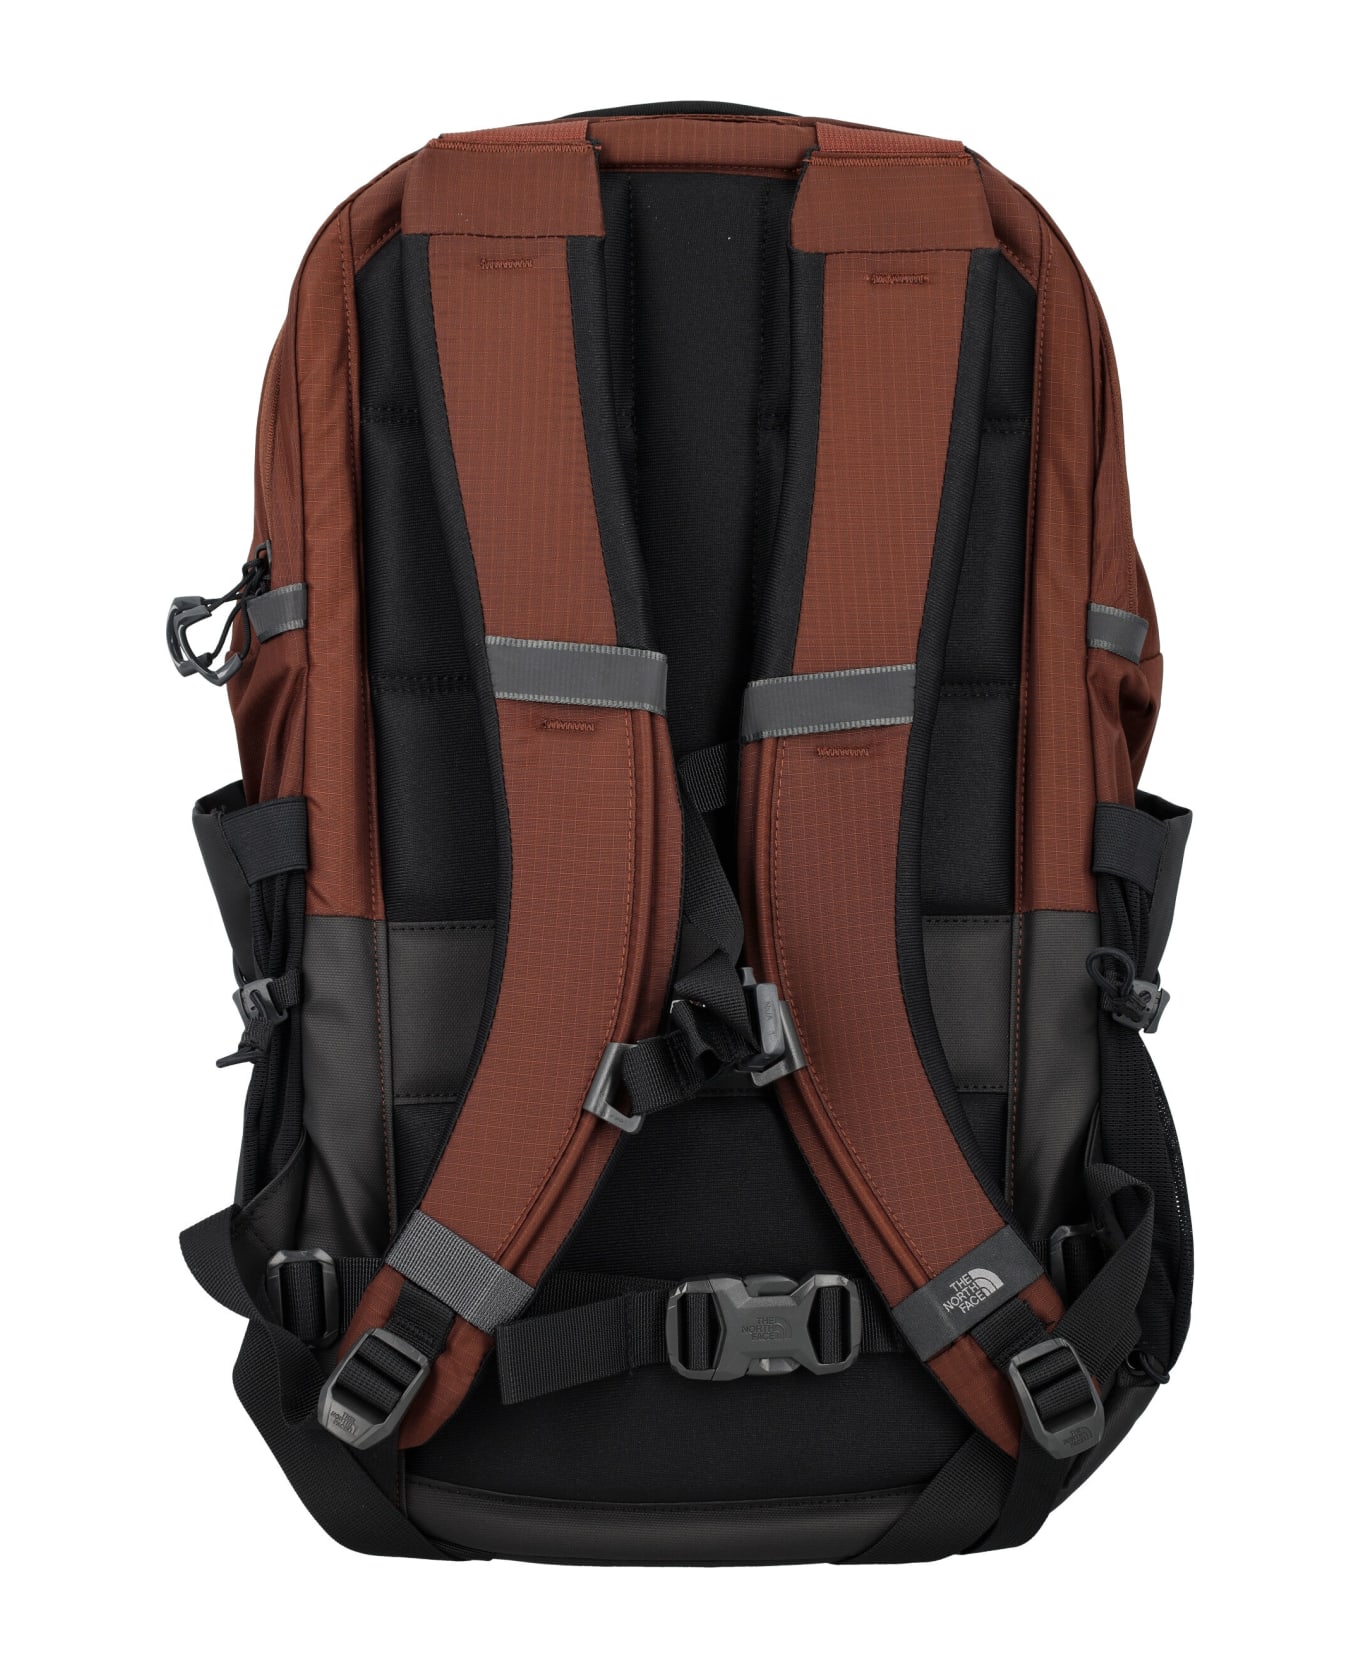 The North Face Borealis Backpack - BROWN バックパック